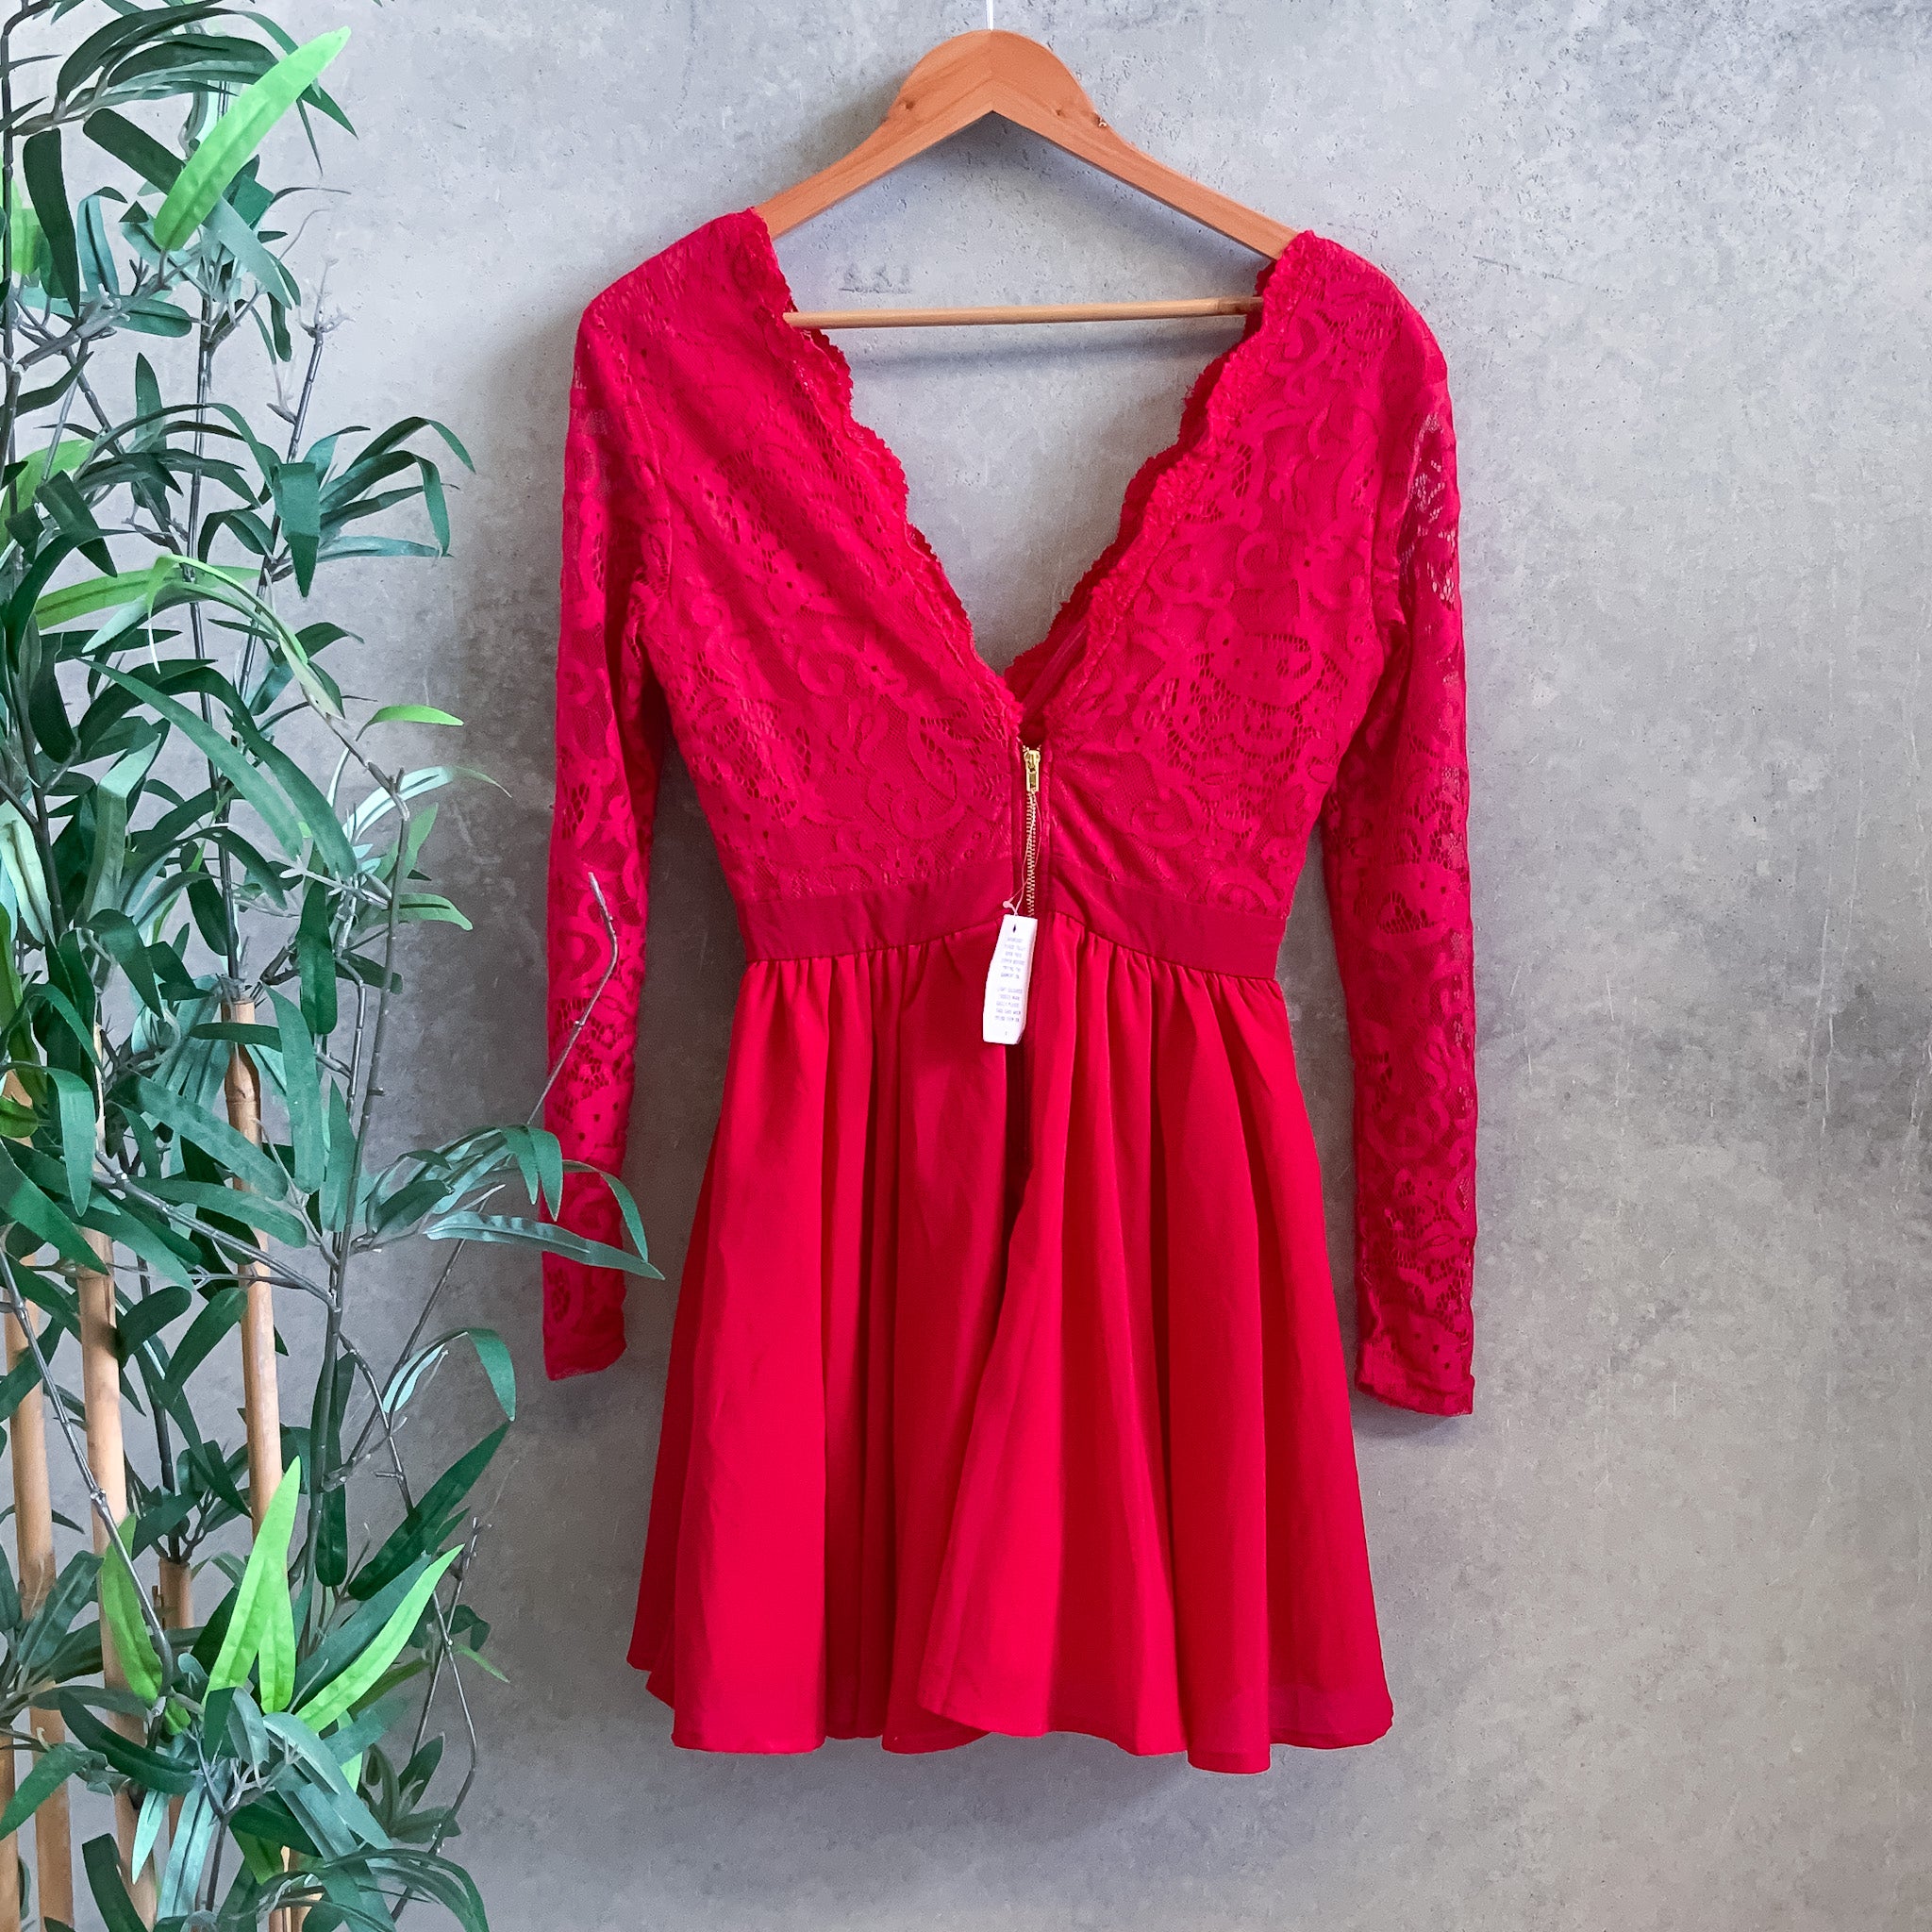 BNWT MISSGUIDED Long Sleeve Red Lace Plunge Skater/Party Dress